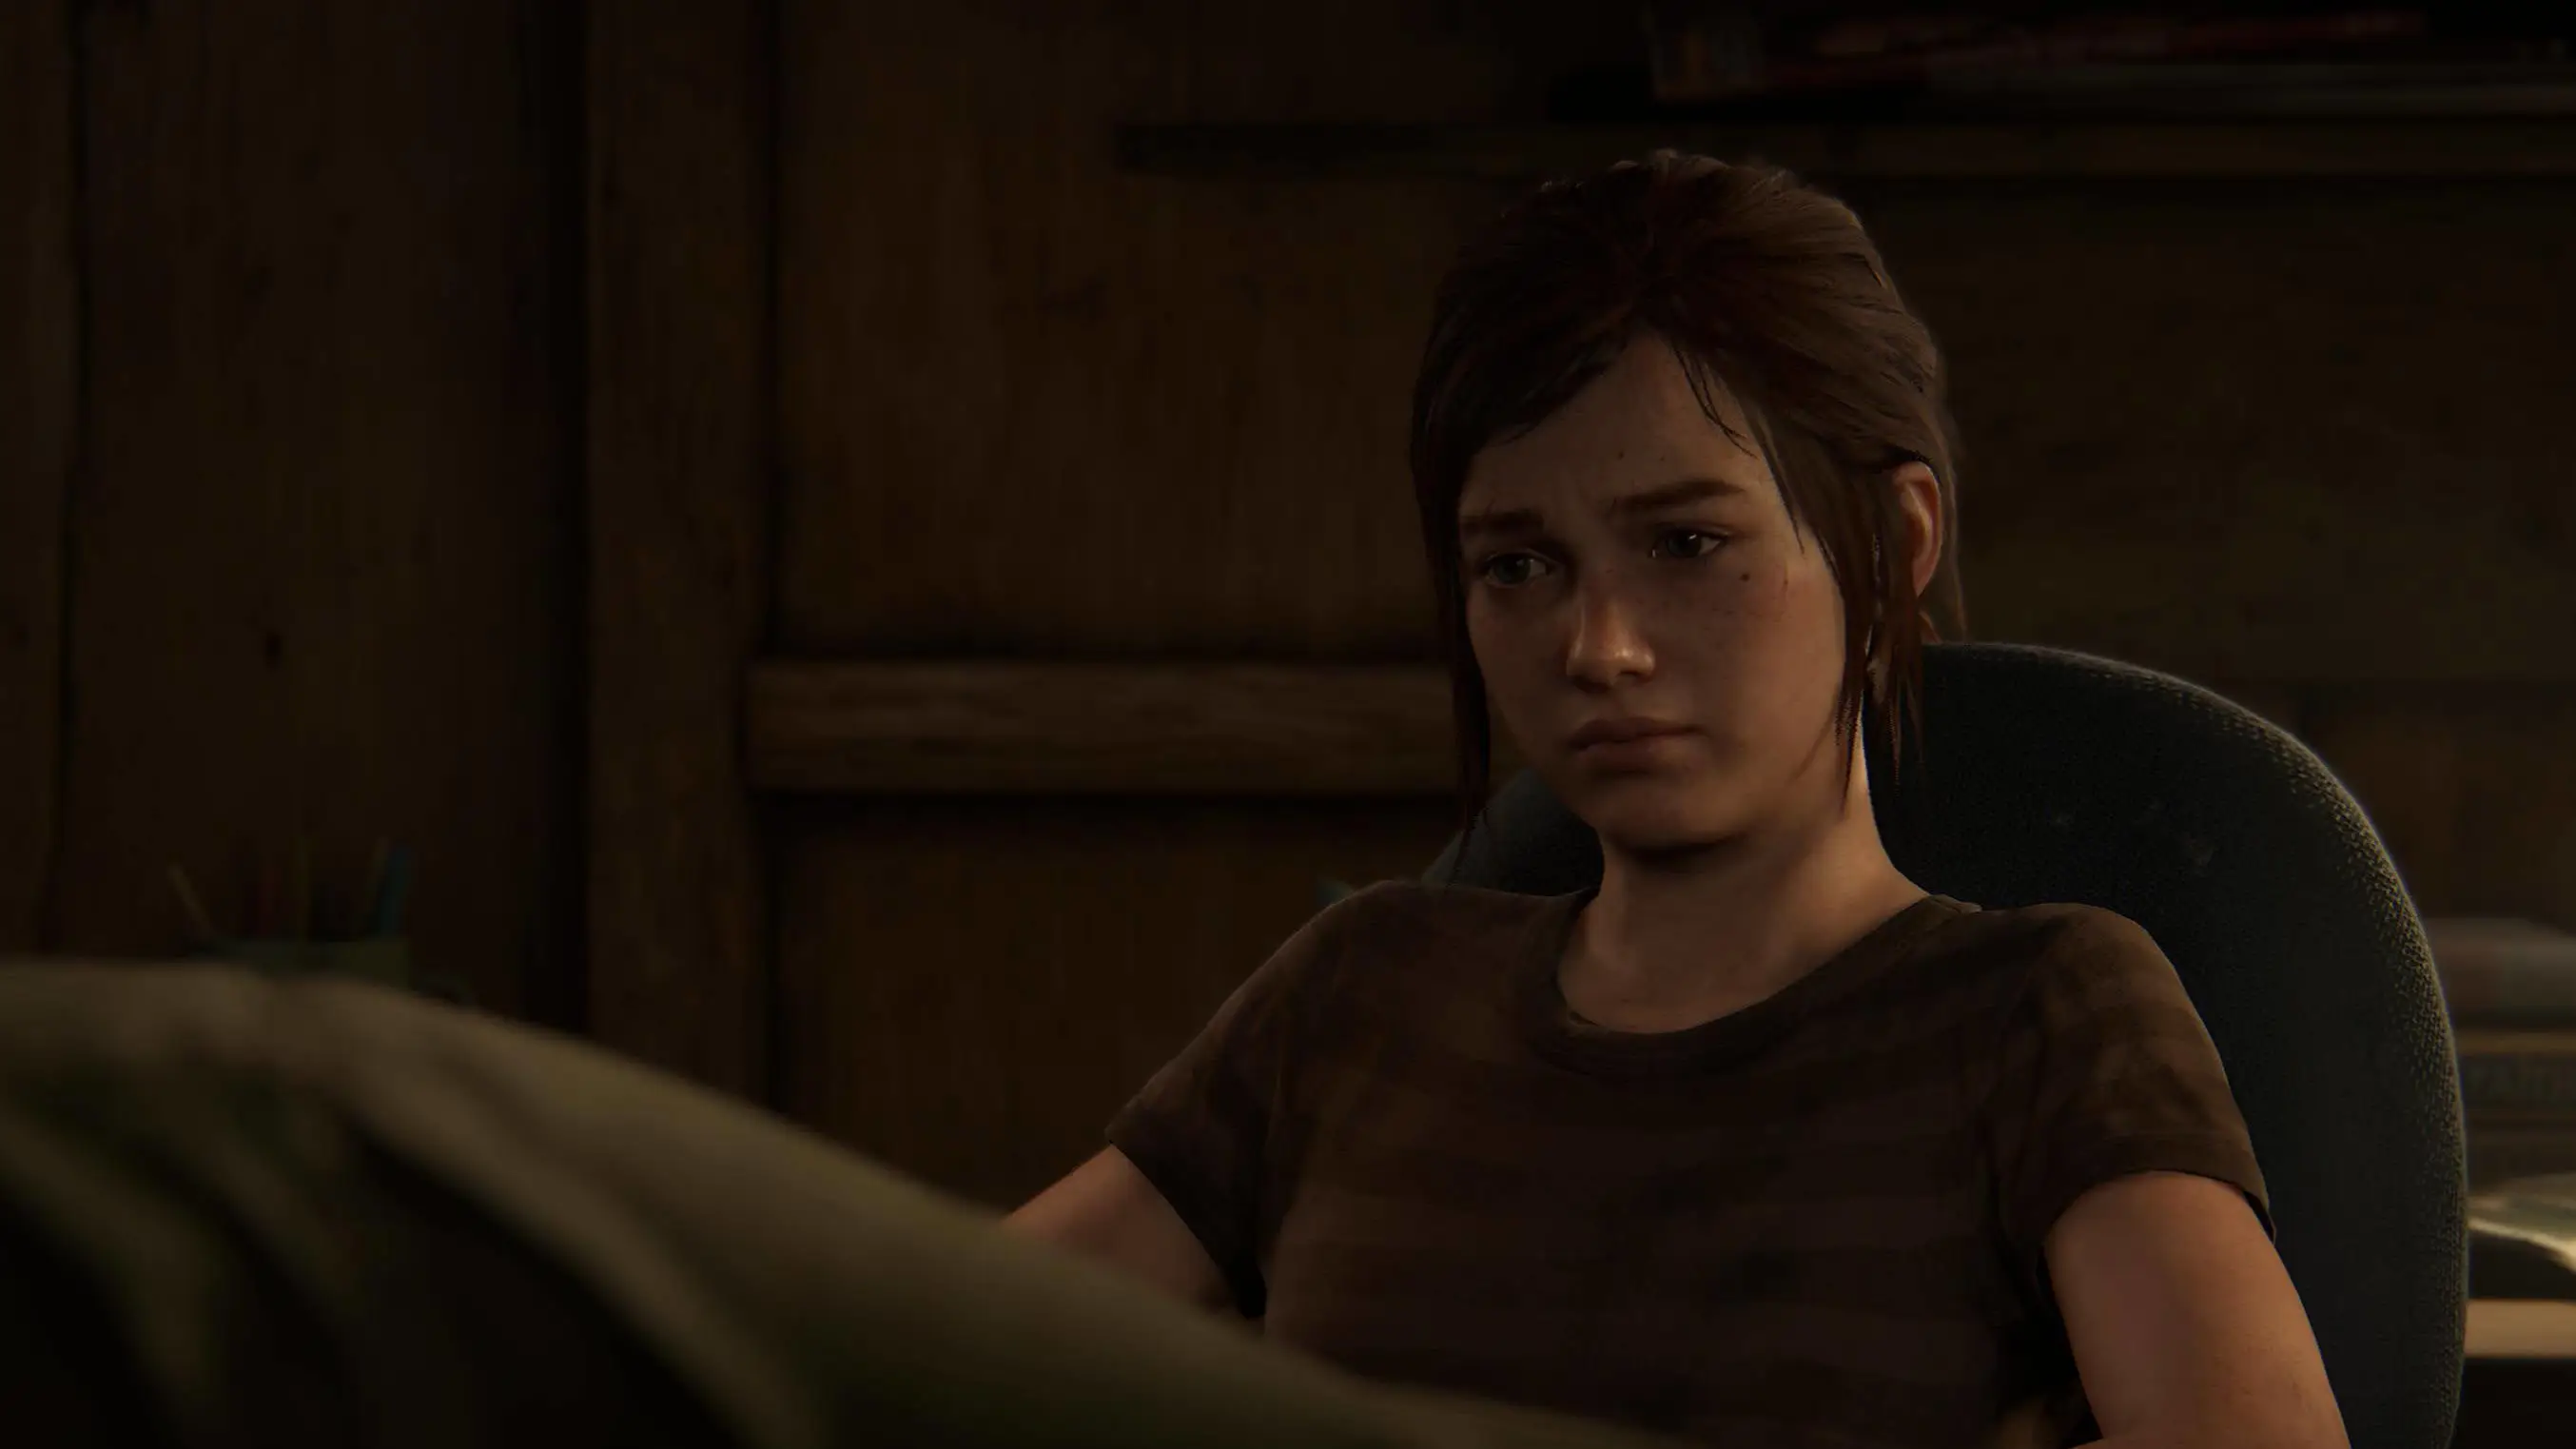 Ellie being conflicted